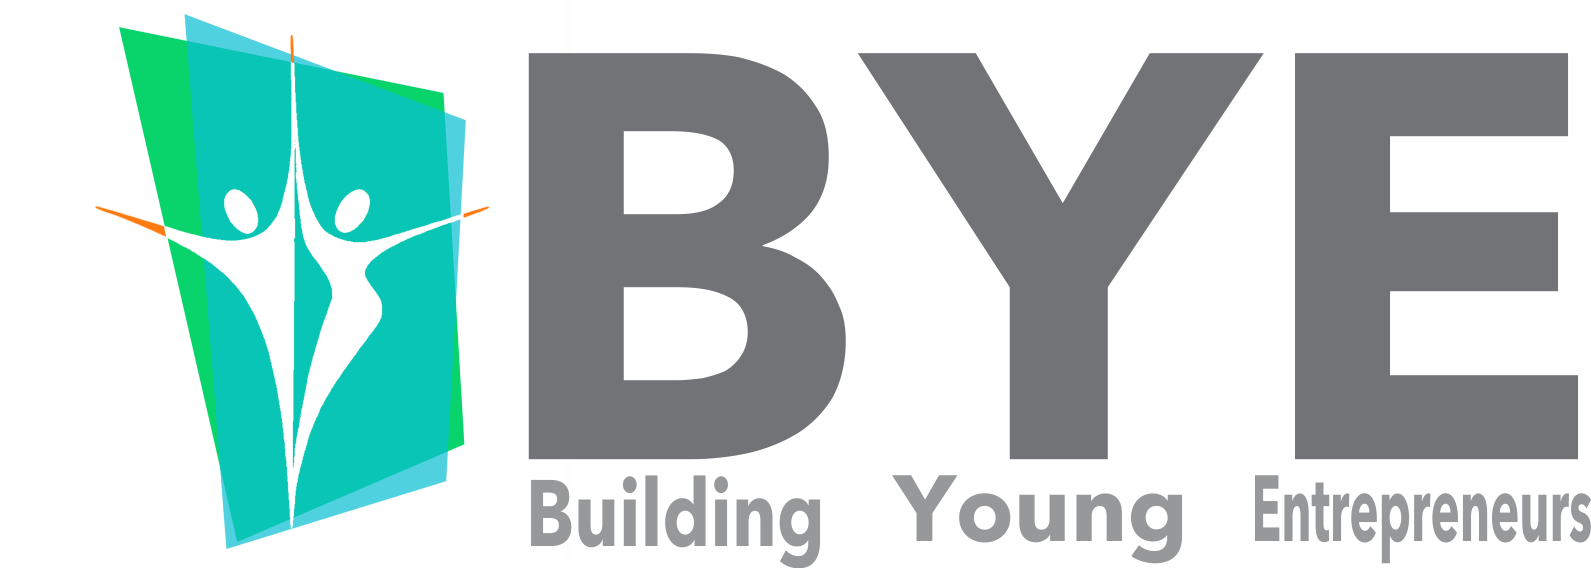 BUILDING OF YOUNG ENTREPRENUERS